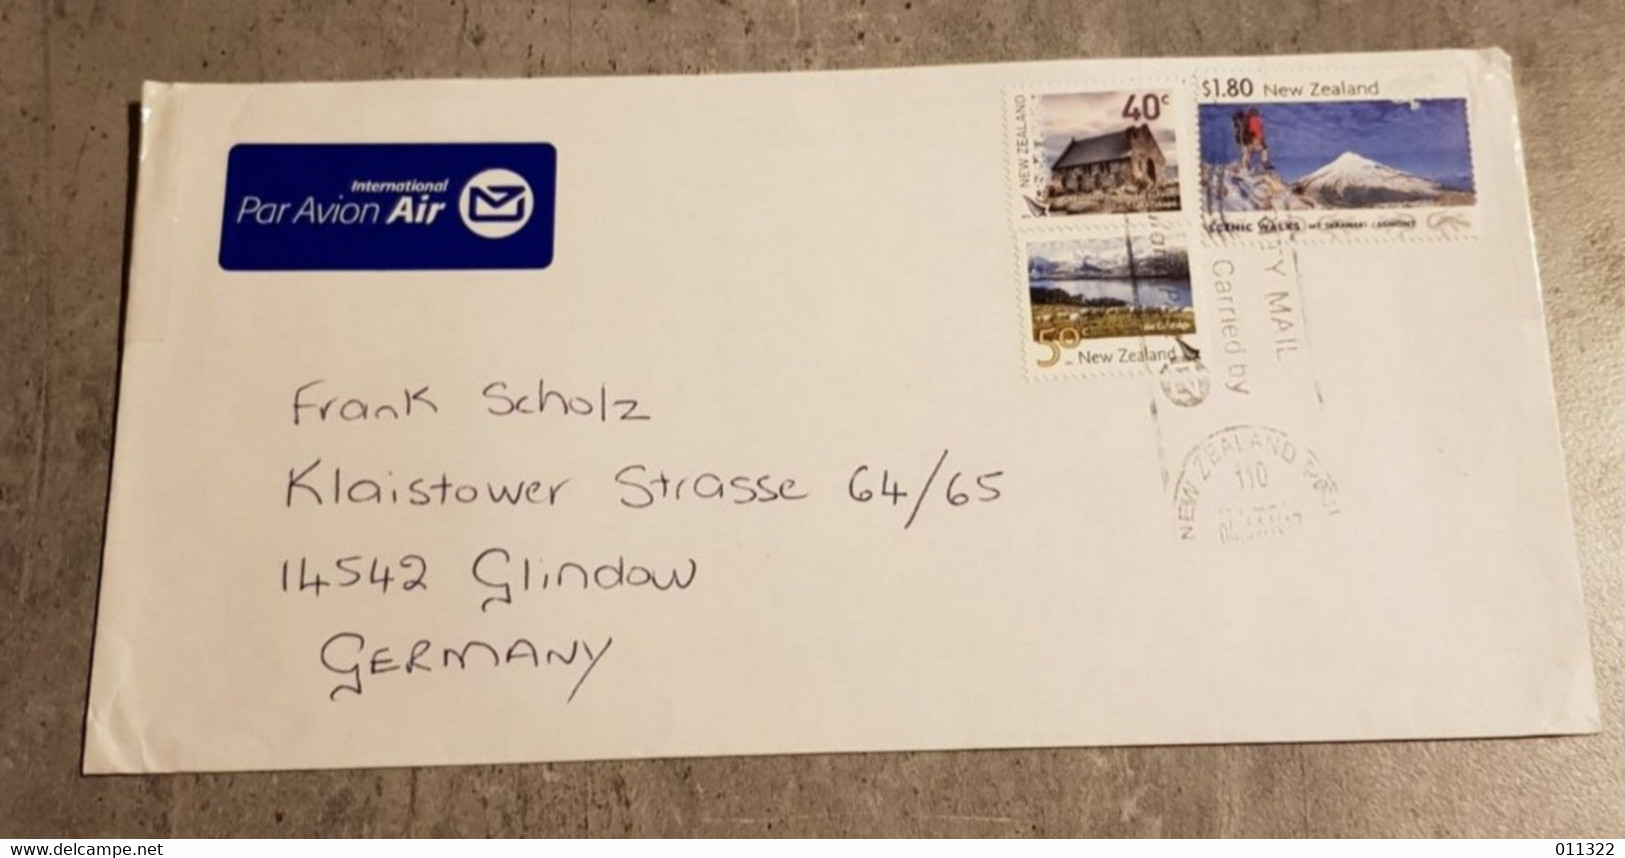 NEW ZEALAND COVER CIRCULED SEND TO GERMANY - Airmail